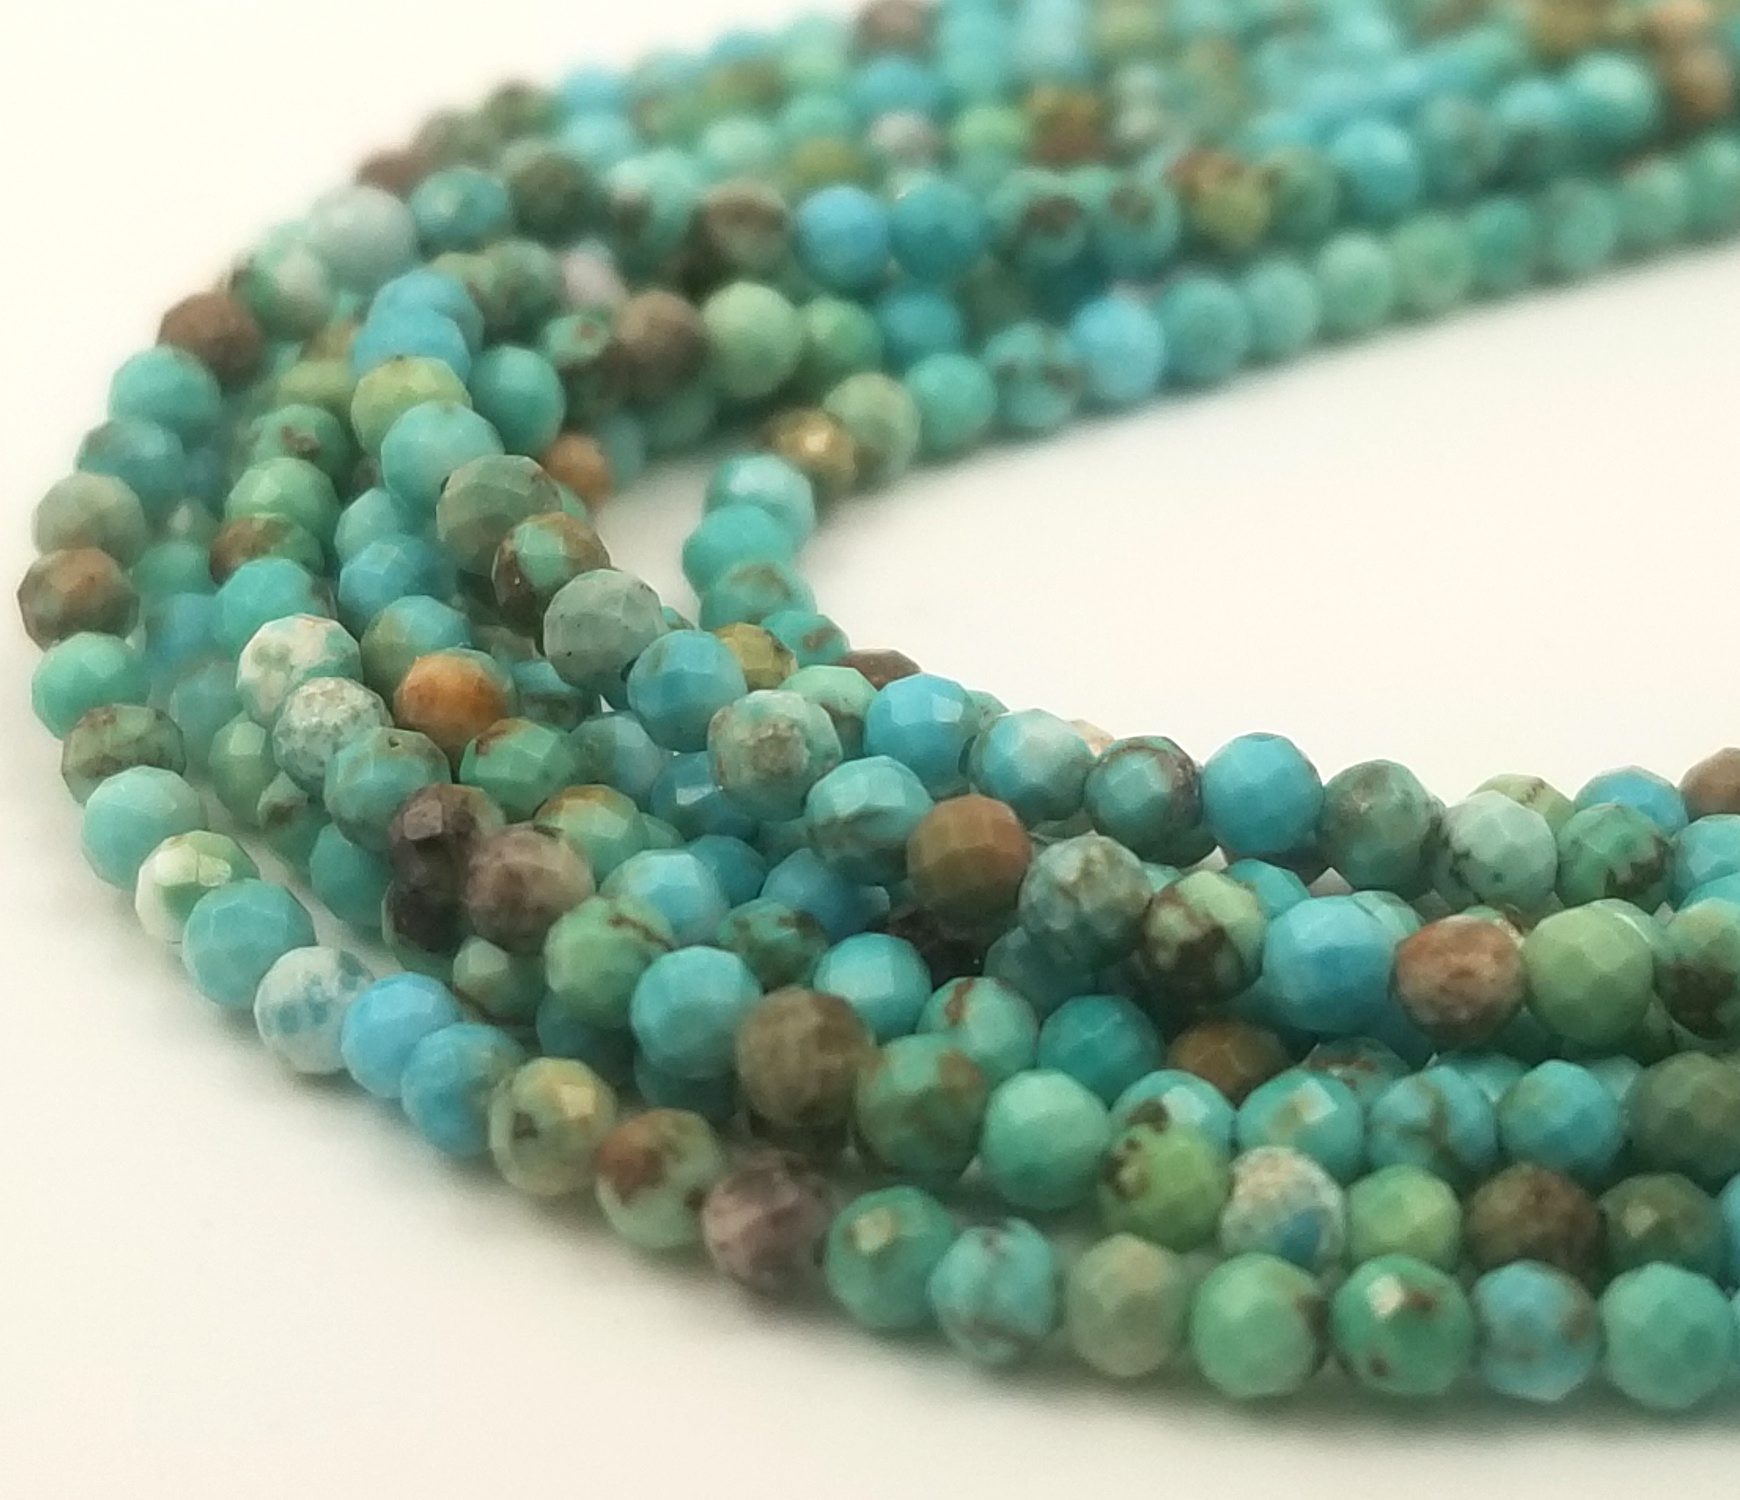 Faceted Turquoise Mm Mm Mm Natural Round Beads No Heat Or Treated